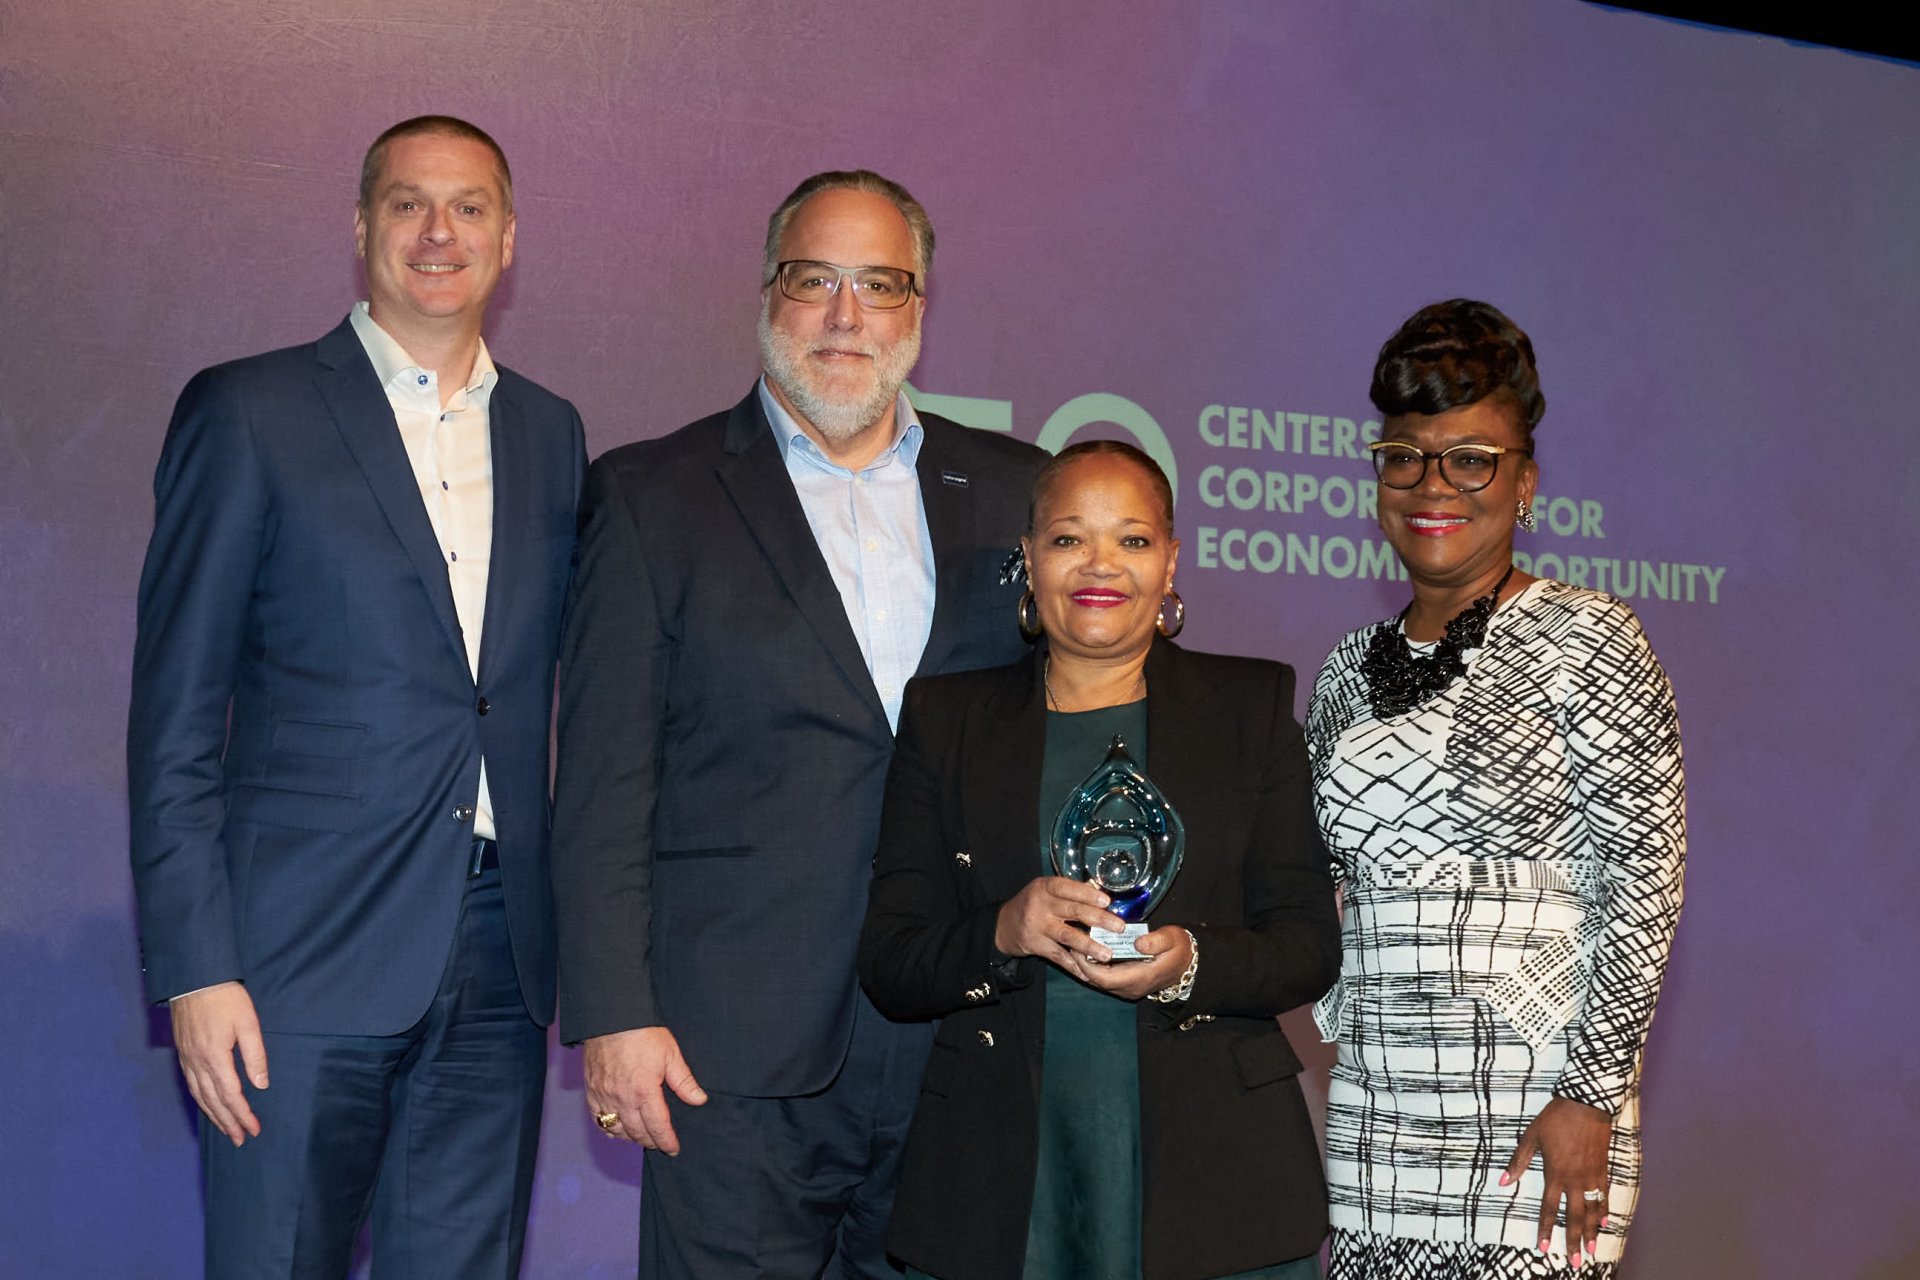 CenterState CEO 2023 Visionary Award Given To National Grid